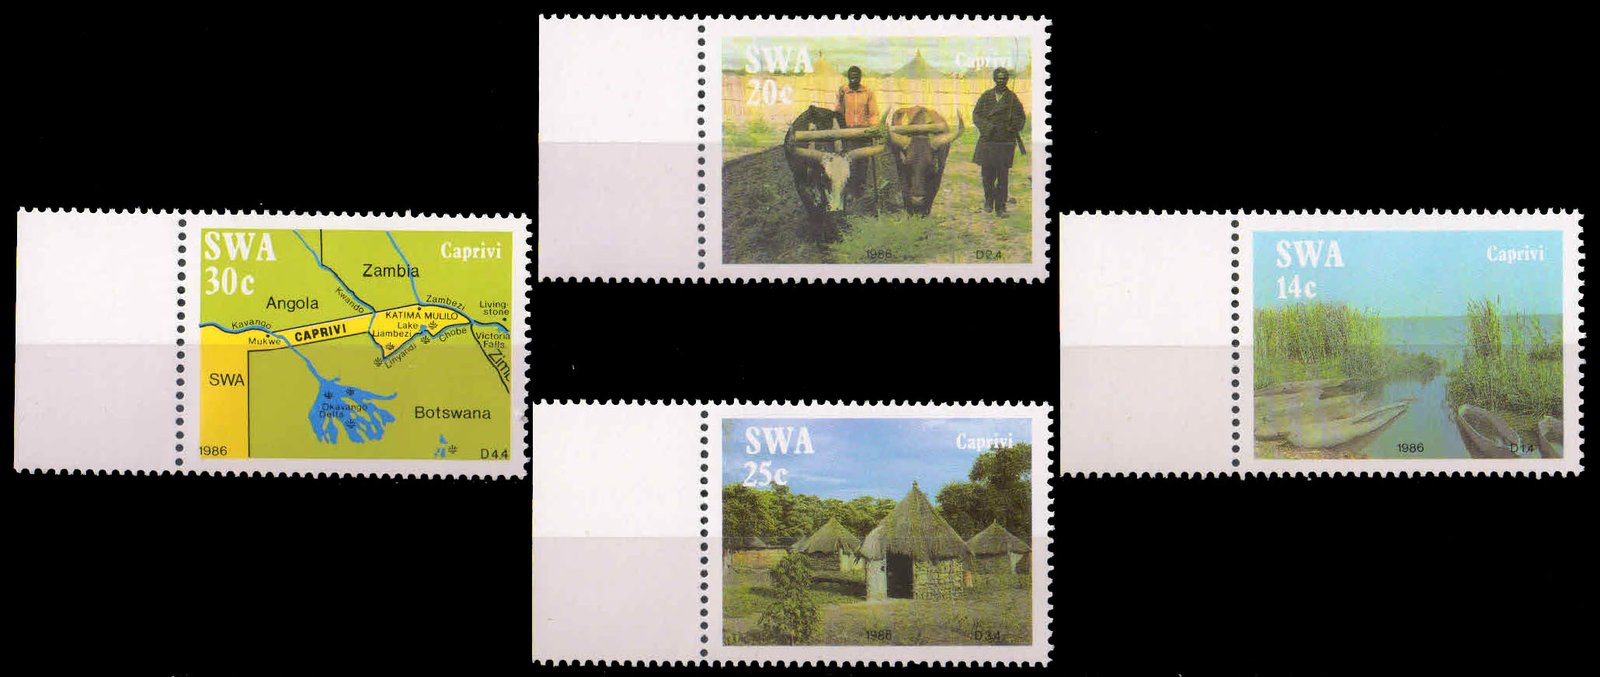 SOUTH WEST AFRICA 1986-Life in the Caprivi Strip-Agriculture, Map, Lake Liambezi, Set of 4, MNH